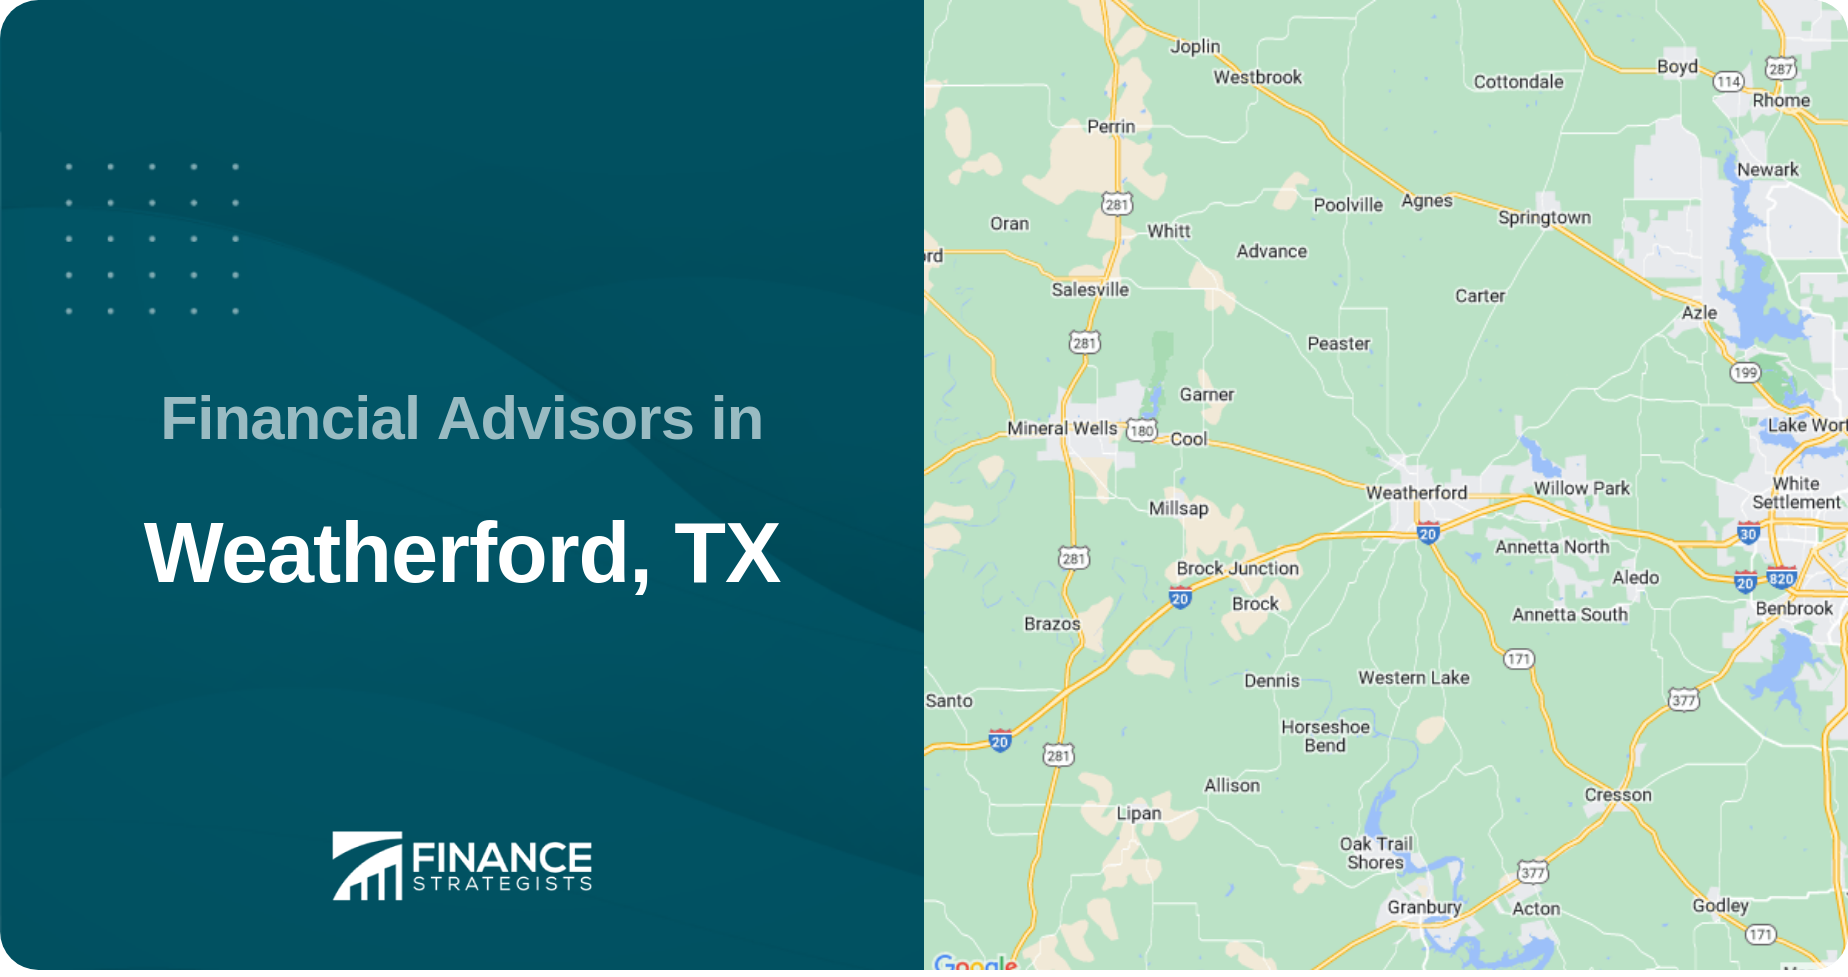 Financial Advisors in Weatherford, TX